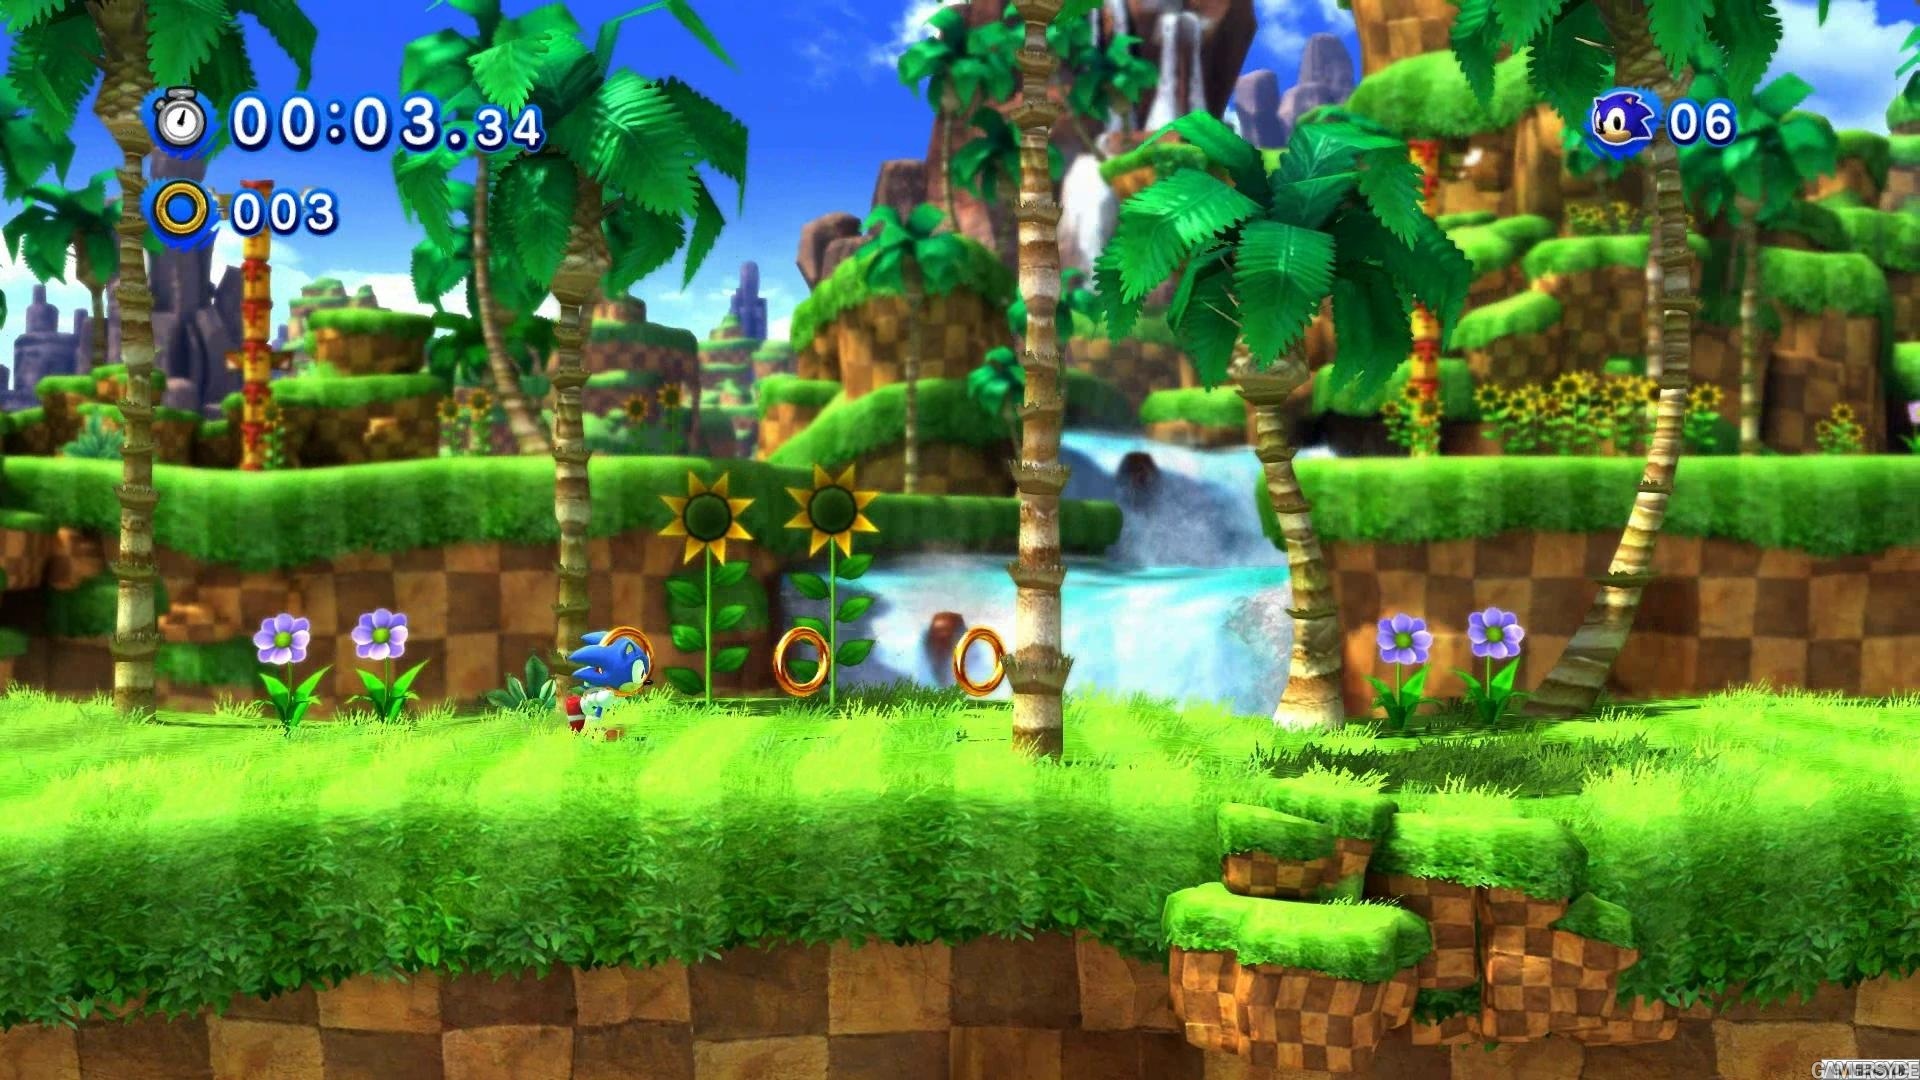 7 minutes of gameplay for Sonic Frontiers - Gamersyde